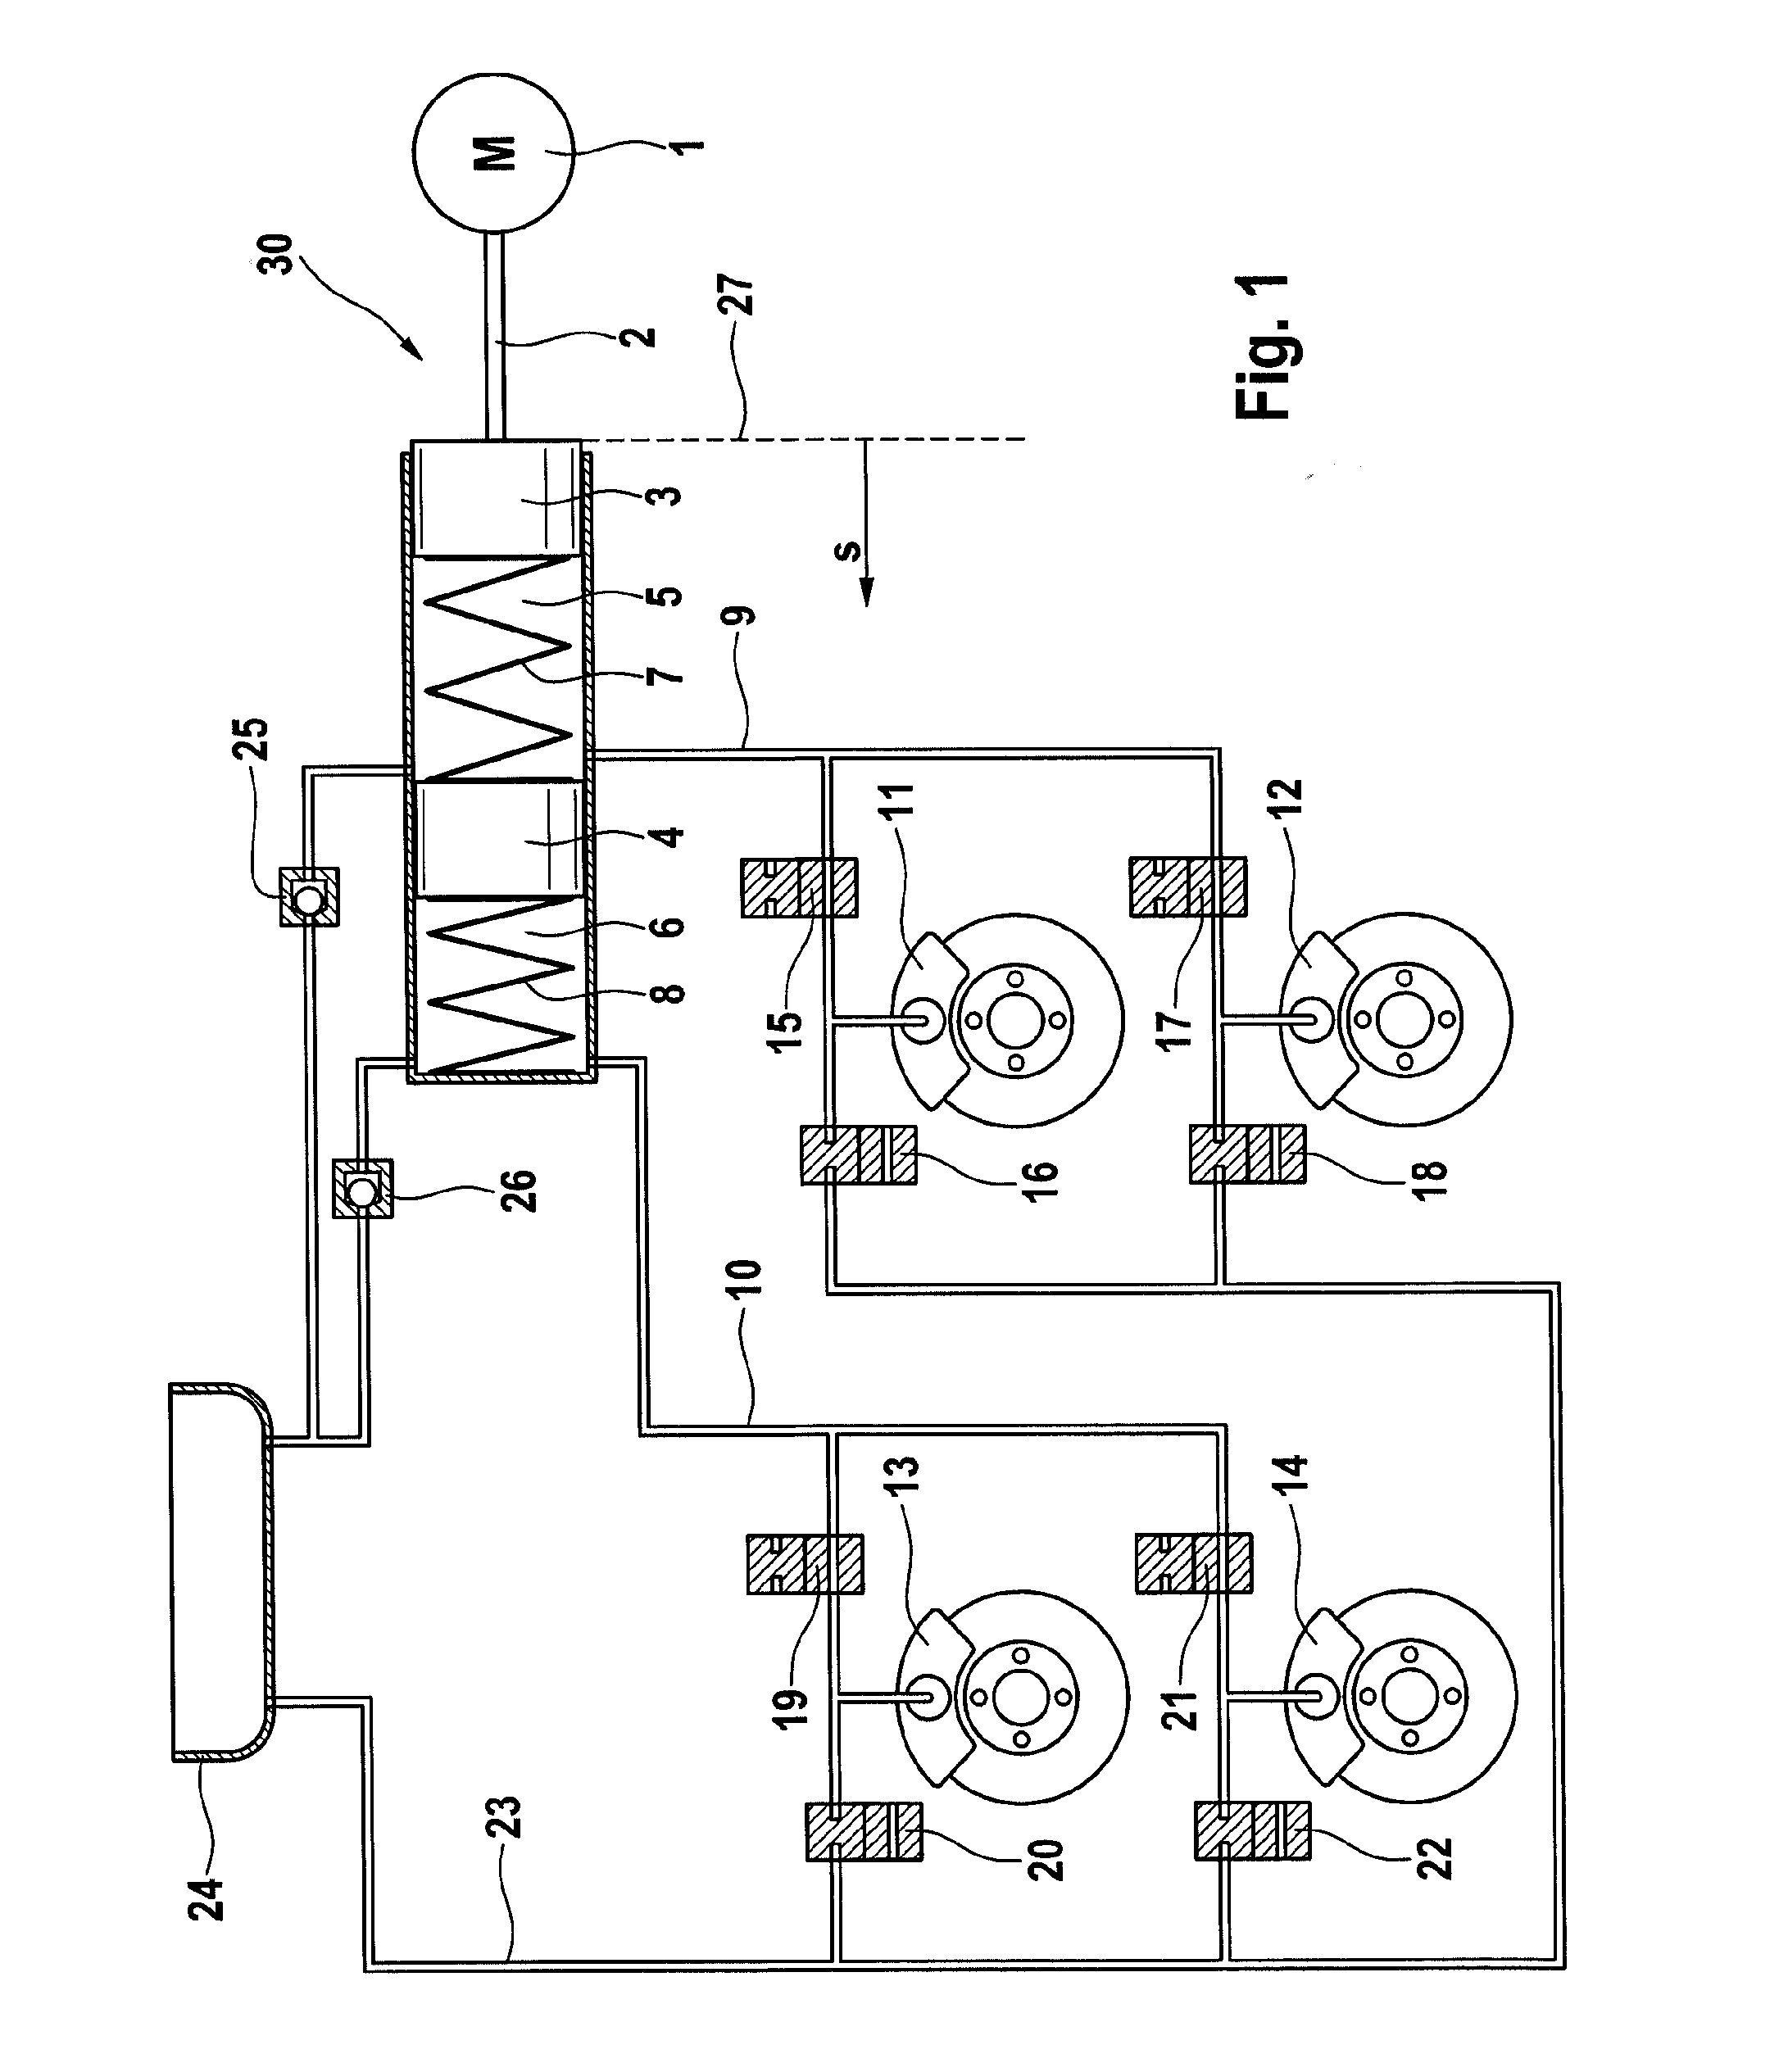 Method for Controlling an Electrohydraulic Braking System and Electrohydraulic Braking System